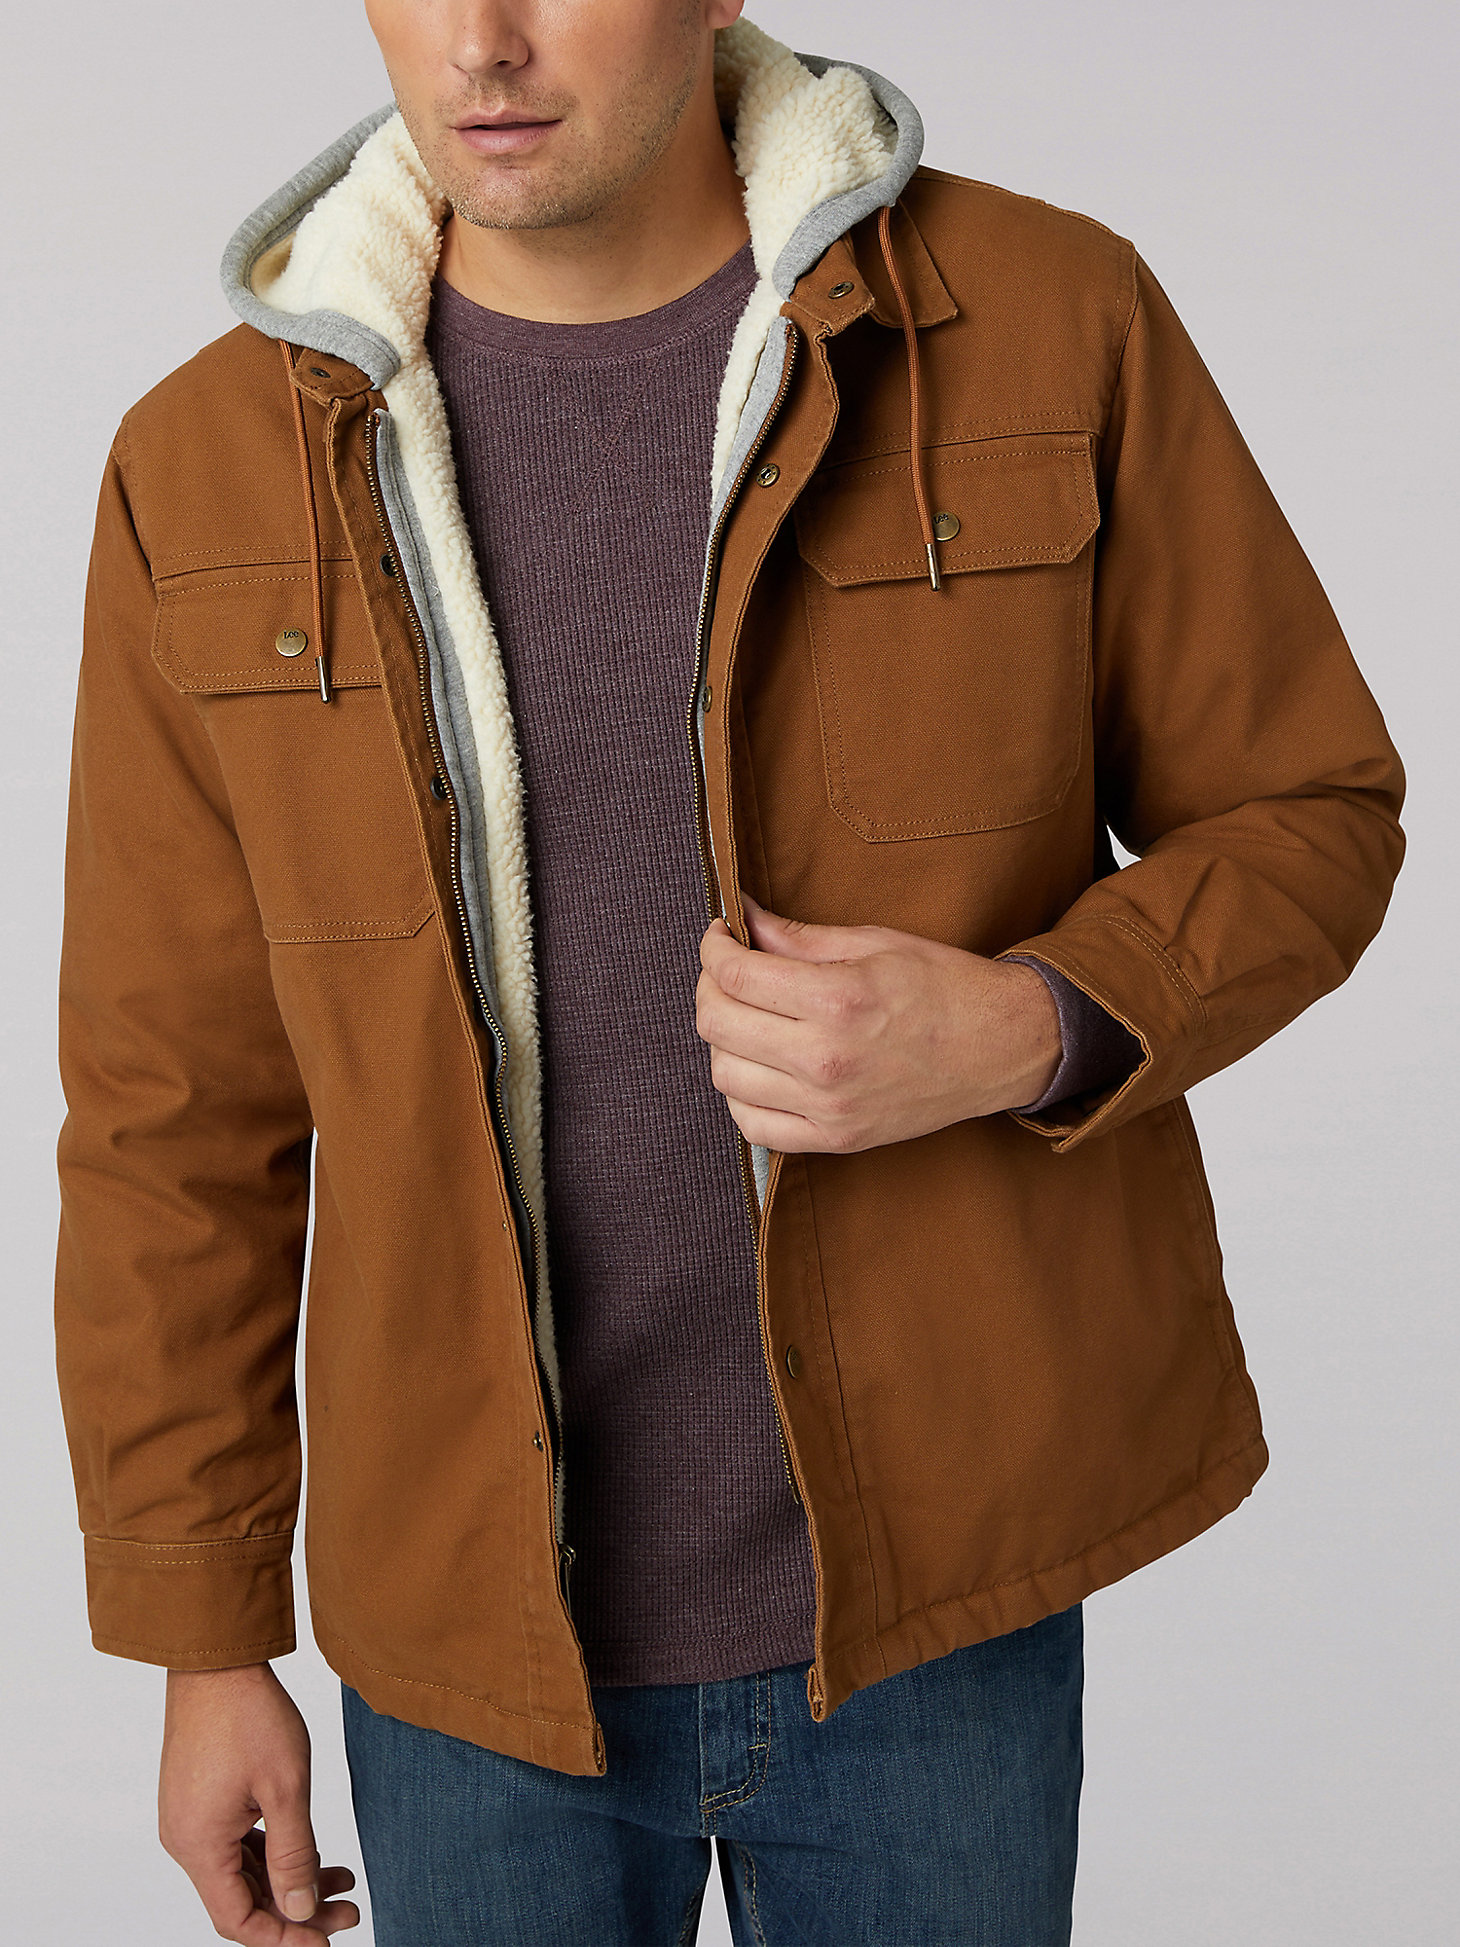 Big Sizes Champion Mens High Performance Jacket with Sherpa Lining